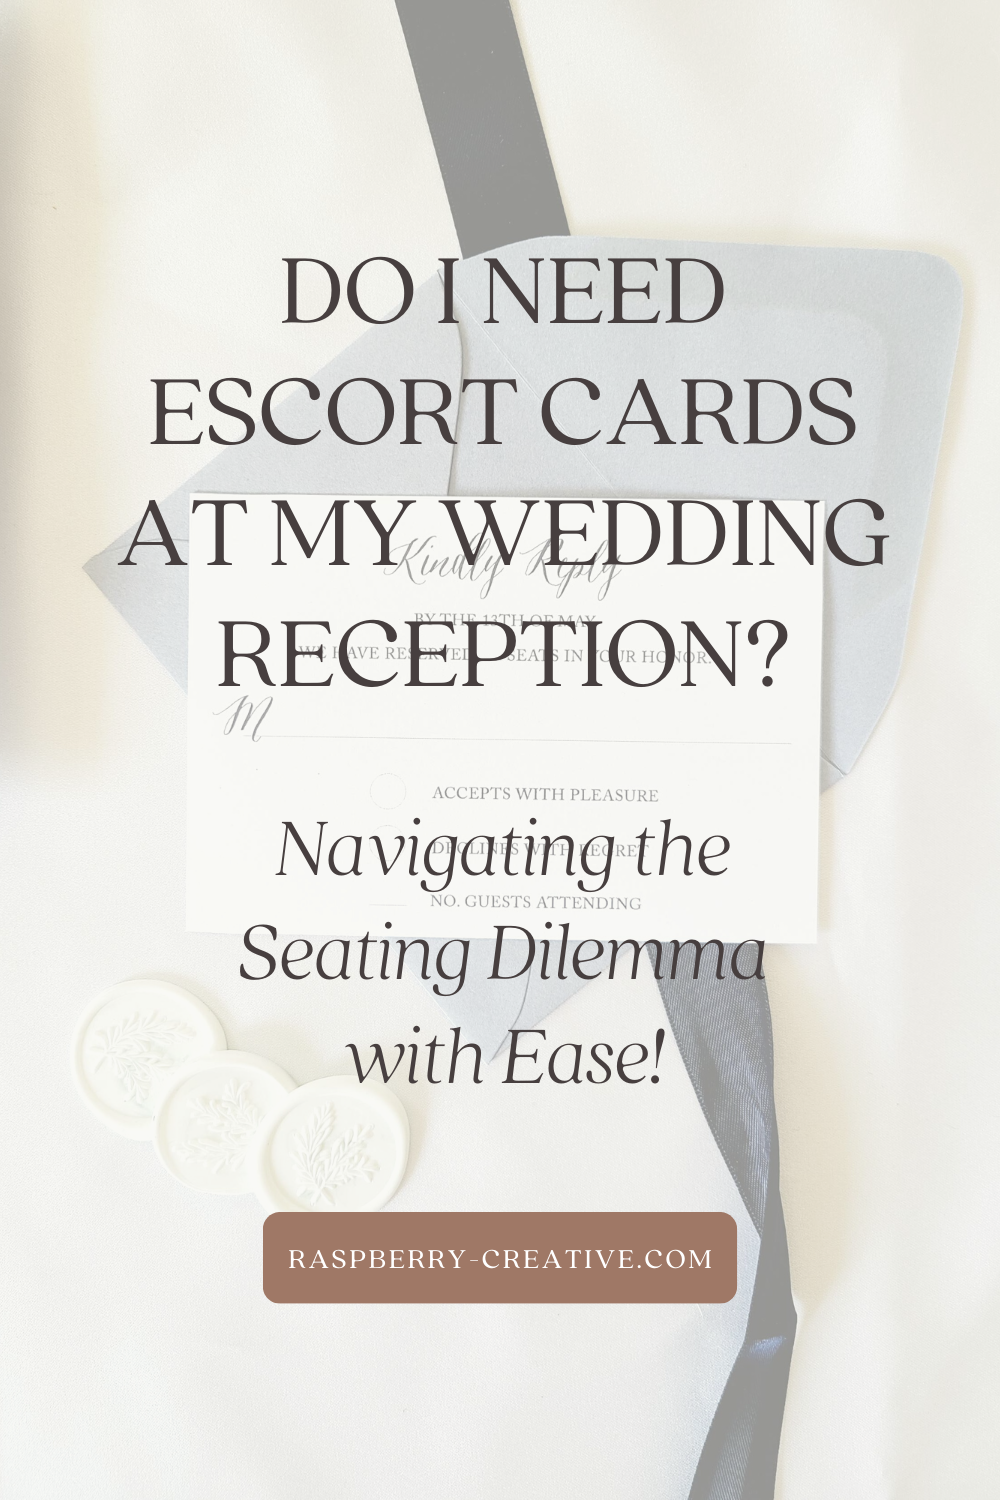 Do I Need Escort Cards at My Wedding Reception? Navigating the Seating Dilemma with Ease!